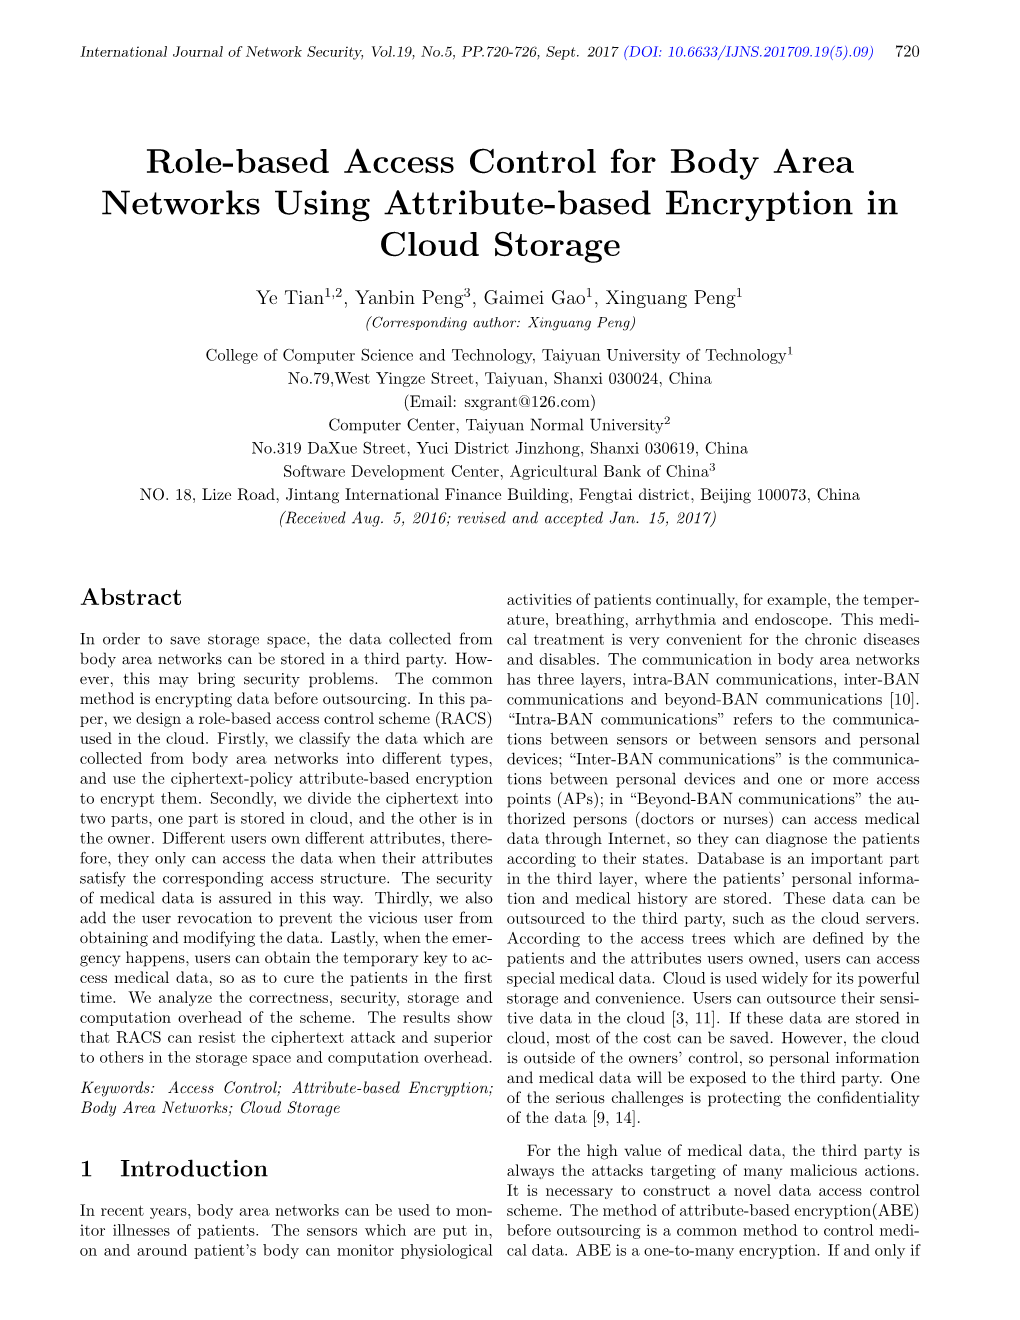 Role-Based Access Control for Body Area Networks Using Attribute-Based Encryption in Cloud Storage